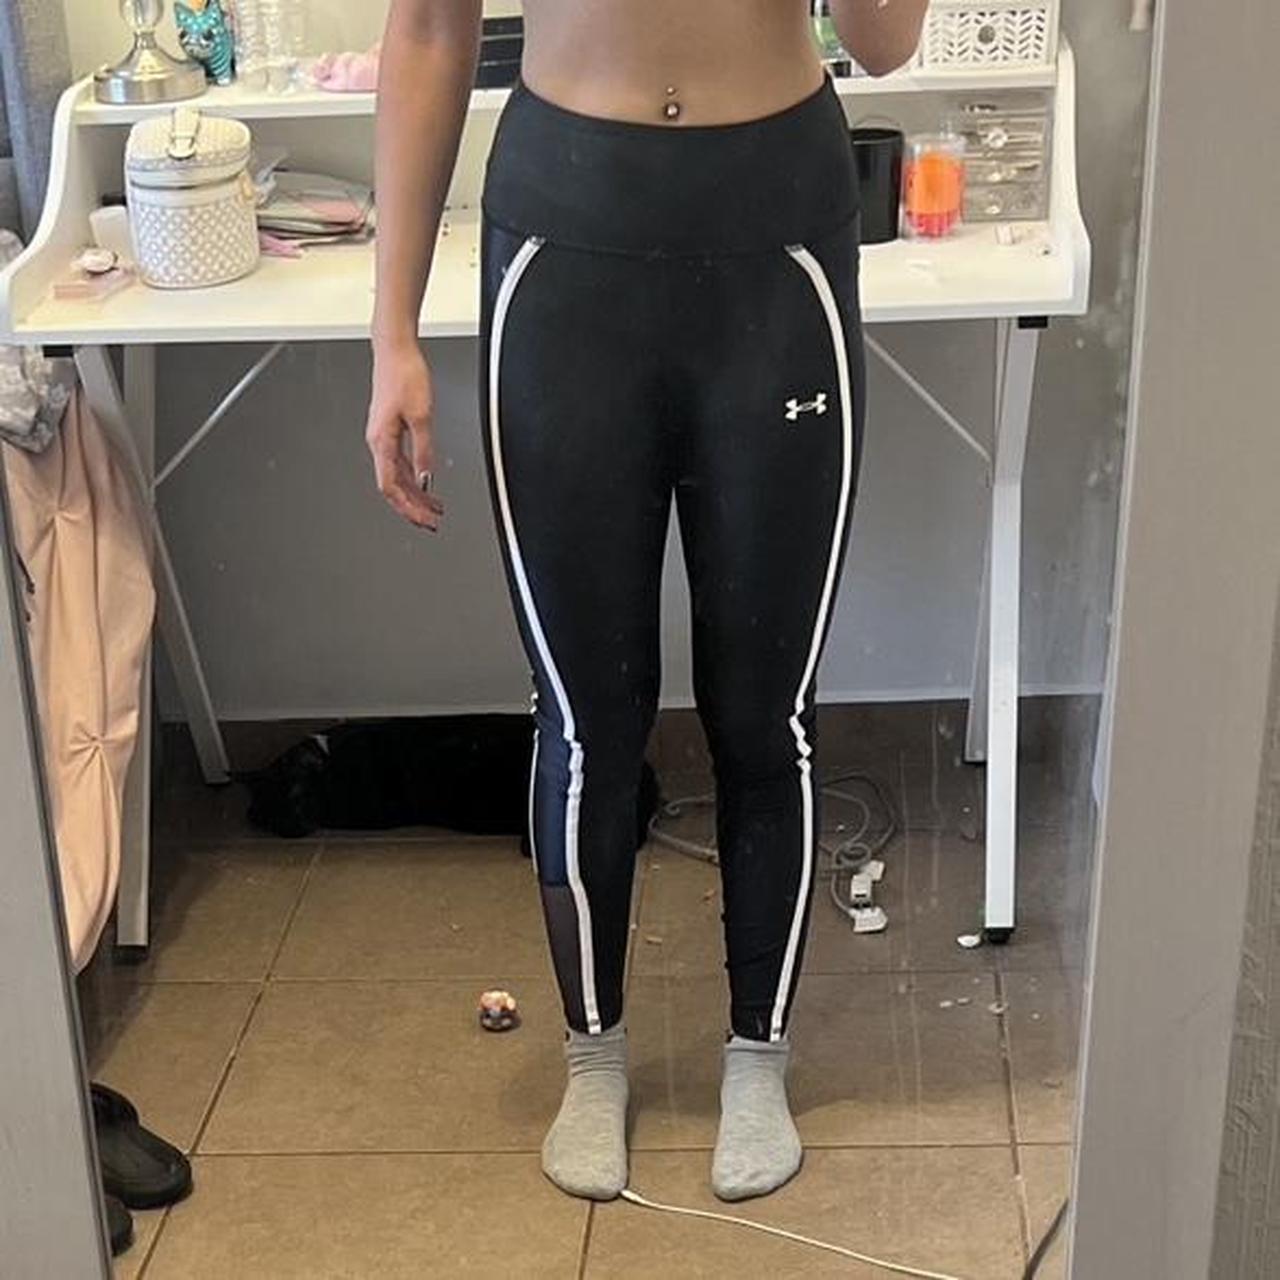 Under armour leggings black/grey and white Size xs - Depop